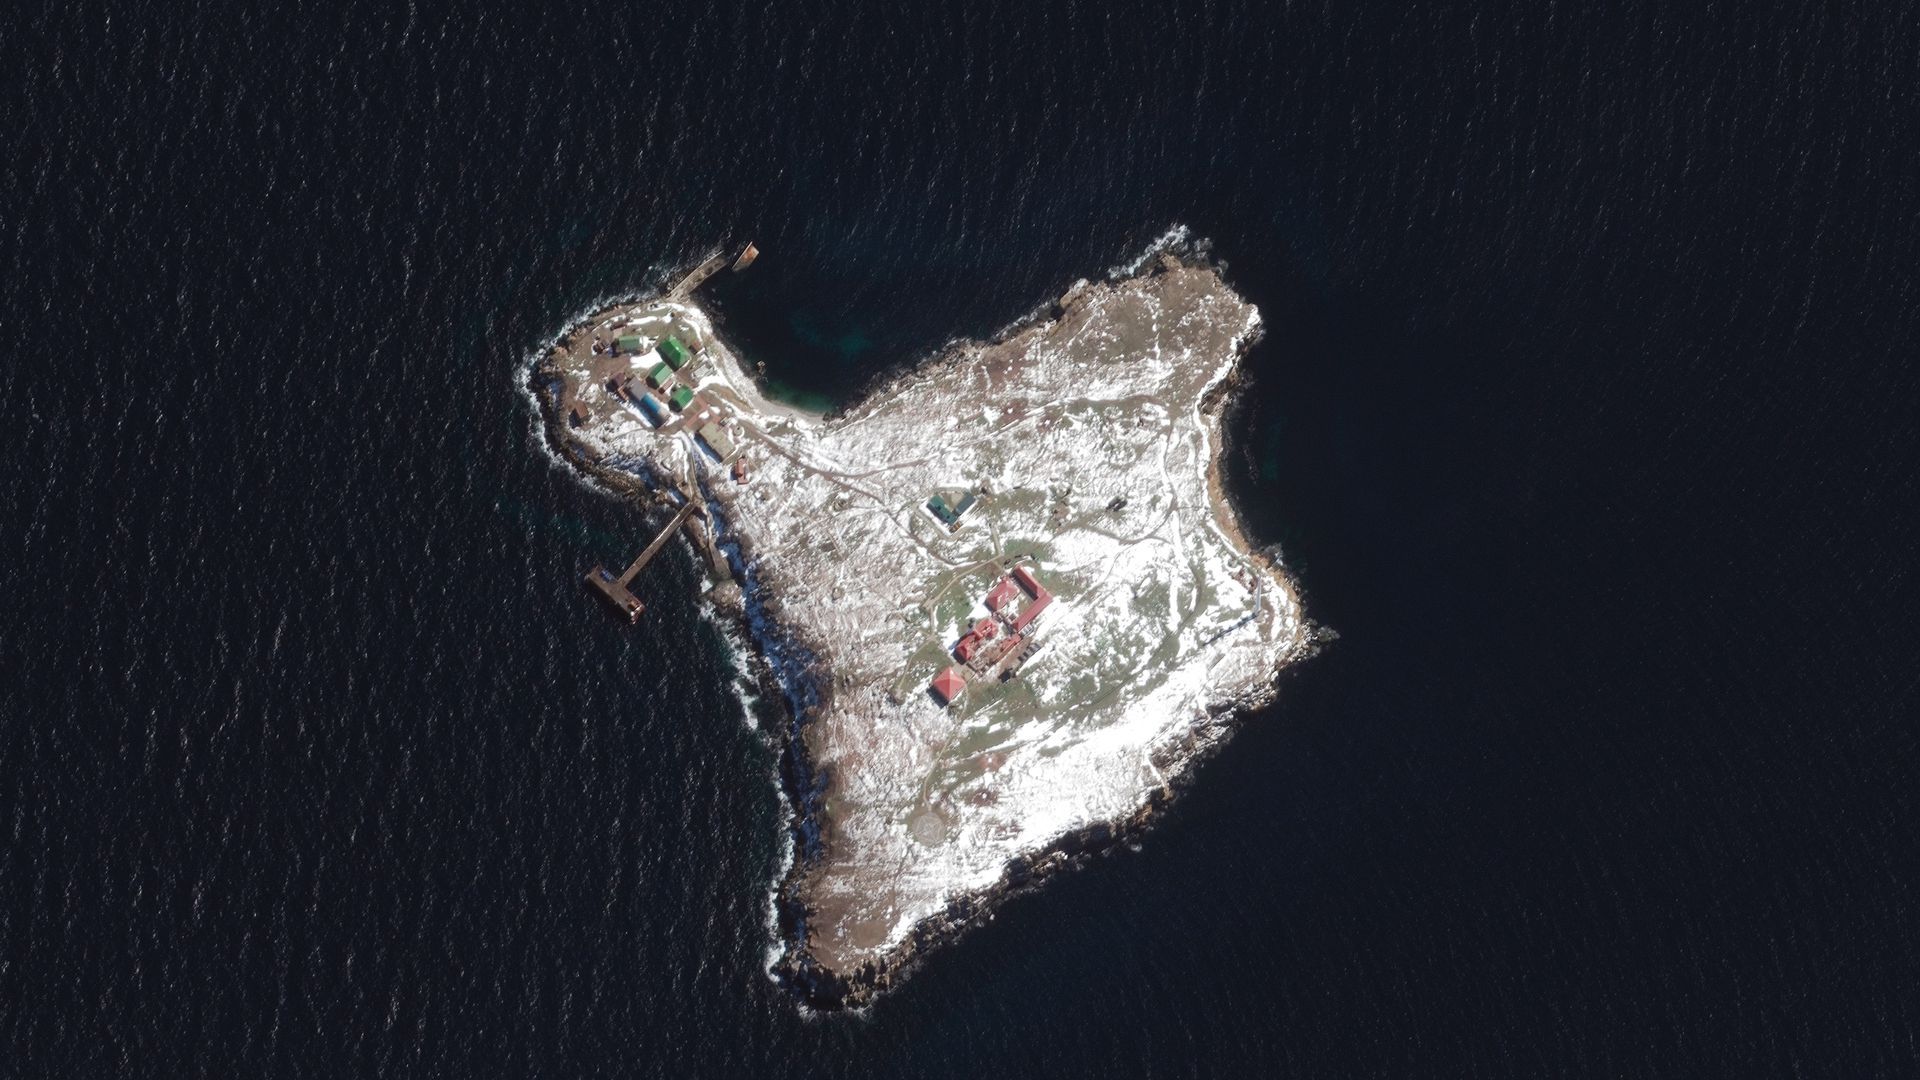 A satellite image of Snake Island in the Black Sea captured by Maxar Technologies after Russia's invasion on March 13. Photo: Maxar Technologies